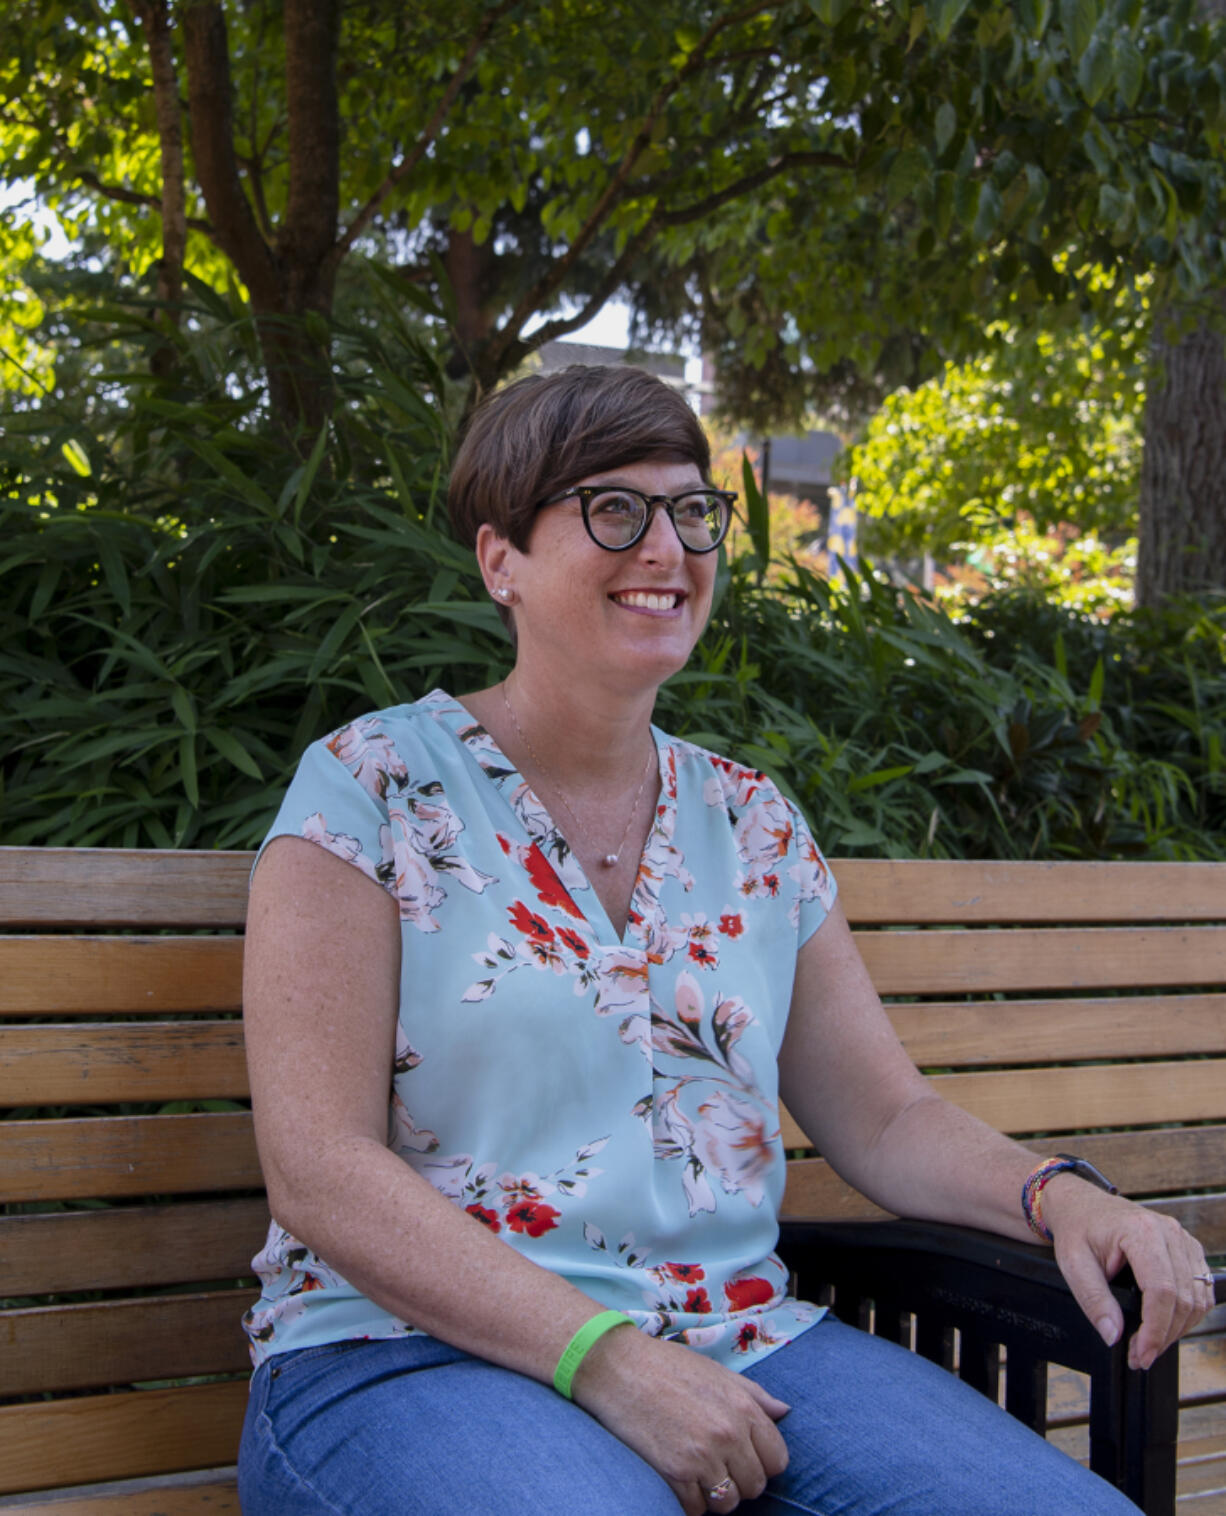 Vancouver resident Laura Ellsworth sits on a park bench for a portrait July 29 at Esther Short Park. Ellsworth is a fully vaccinated kidney transplant recipient but doesn't have full protection from COVID-19. She was part of a study on COVID-19 vaccines in immunocompromised patients.